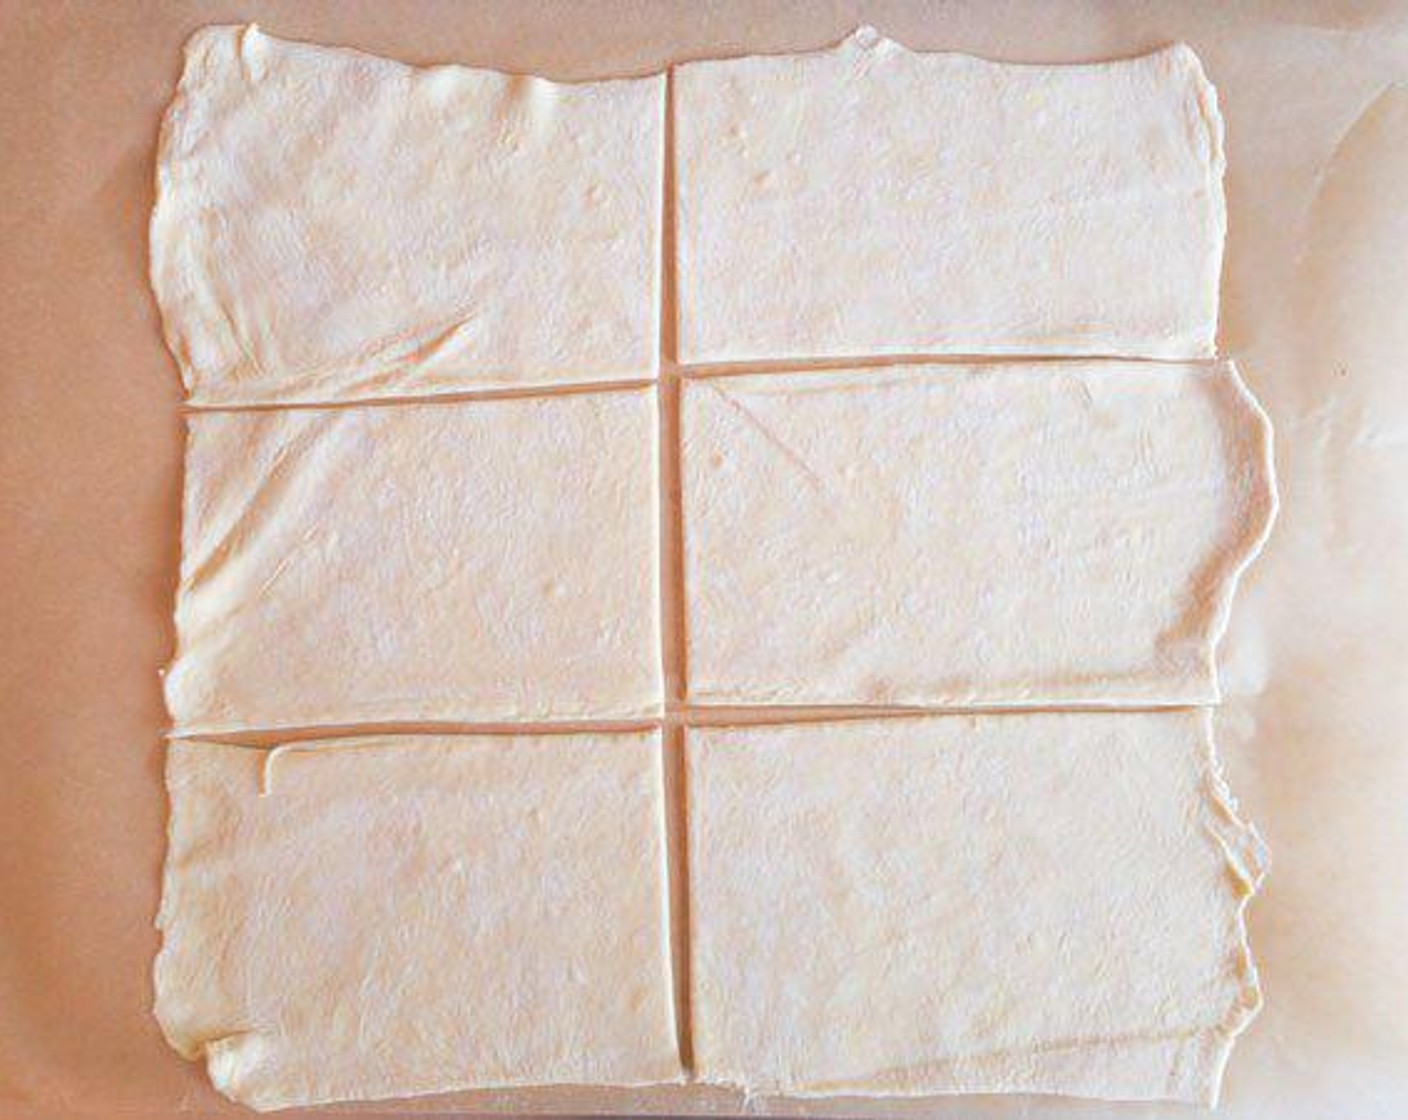 step 6 Put parchment paper on top of pizza pan. Directly on parchment paper, roll out the puff pastry as much as possible. Make into about a 12-inch square. With a pizza wheel, cut the dough to make 6 equal pieces, which allows for more even baking with the thick sweet potato layer.